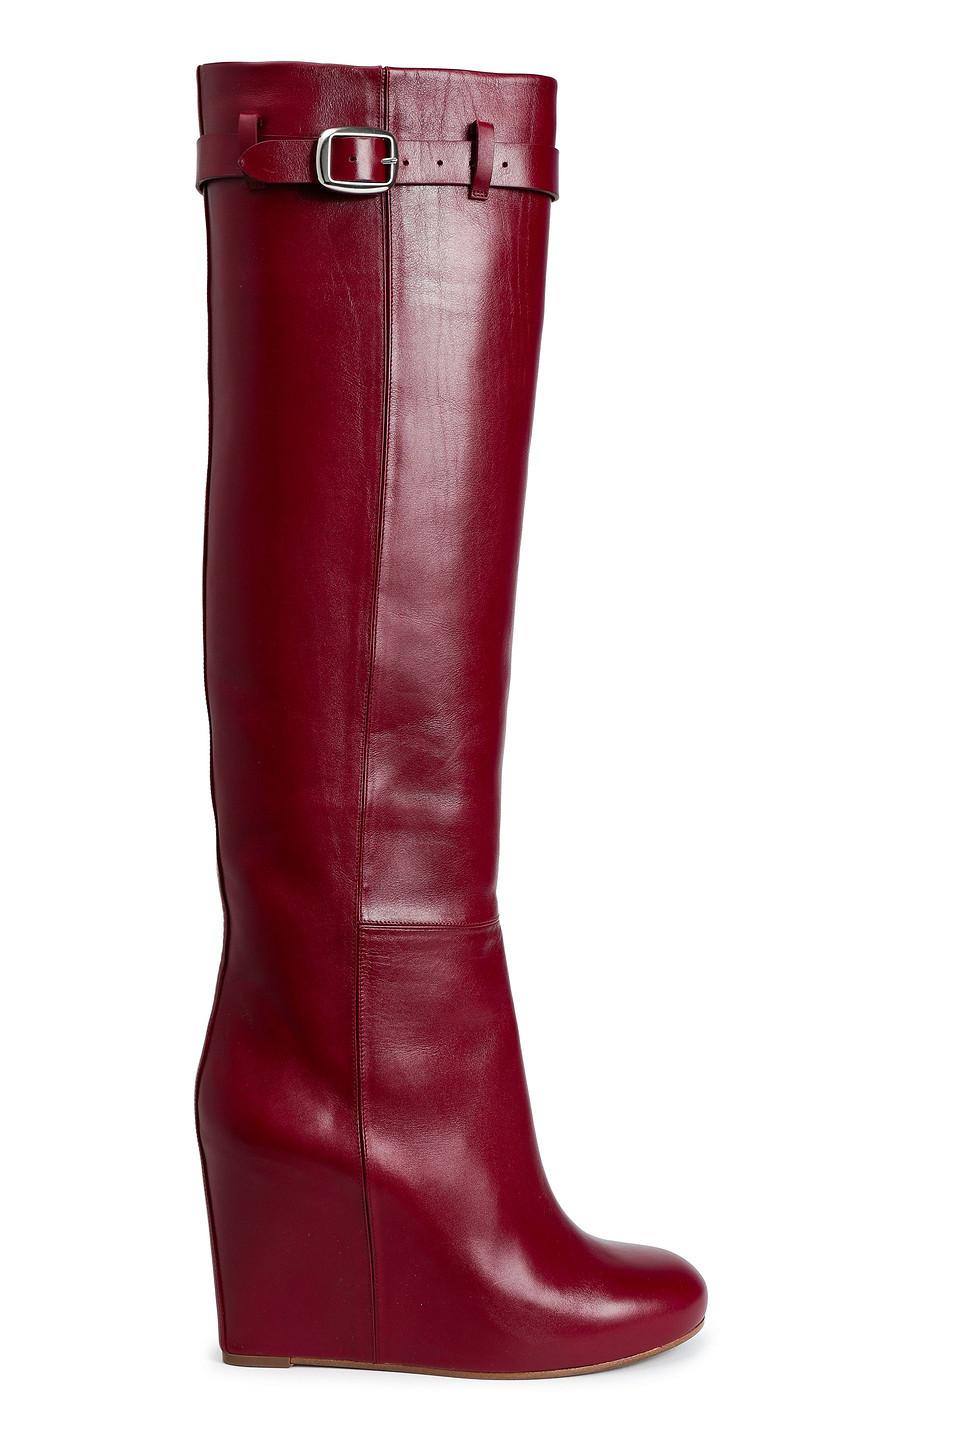 Victoria Beckham Buckled Leather Wedge Knee Boots in Claret (Red) - Lyst